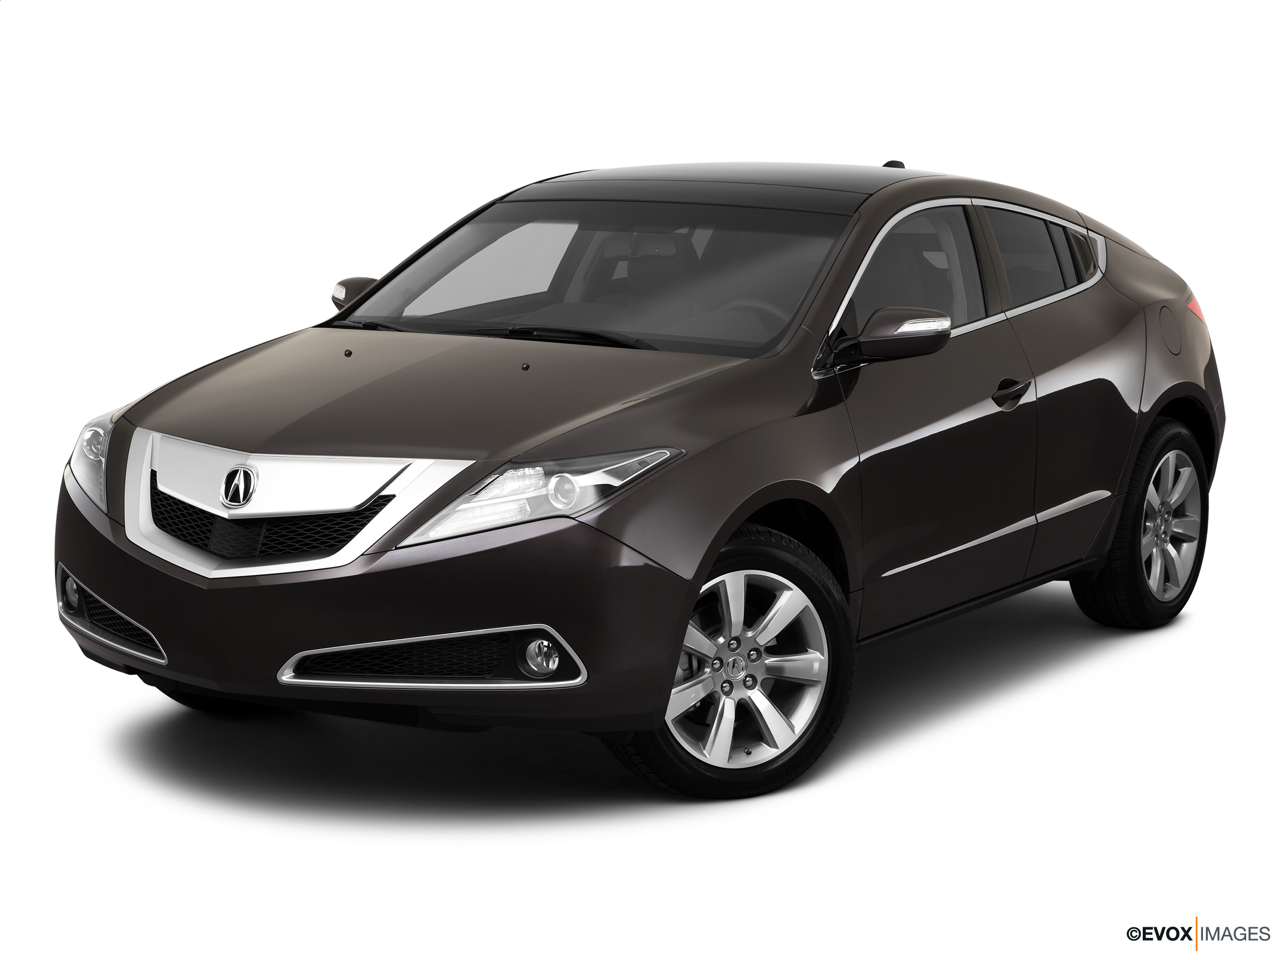 2010 Acura ZDX ZDX Advance Front angle view. 